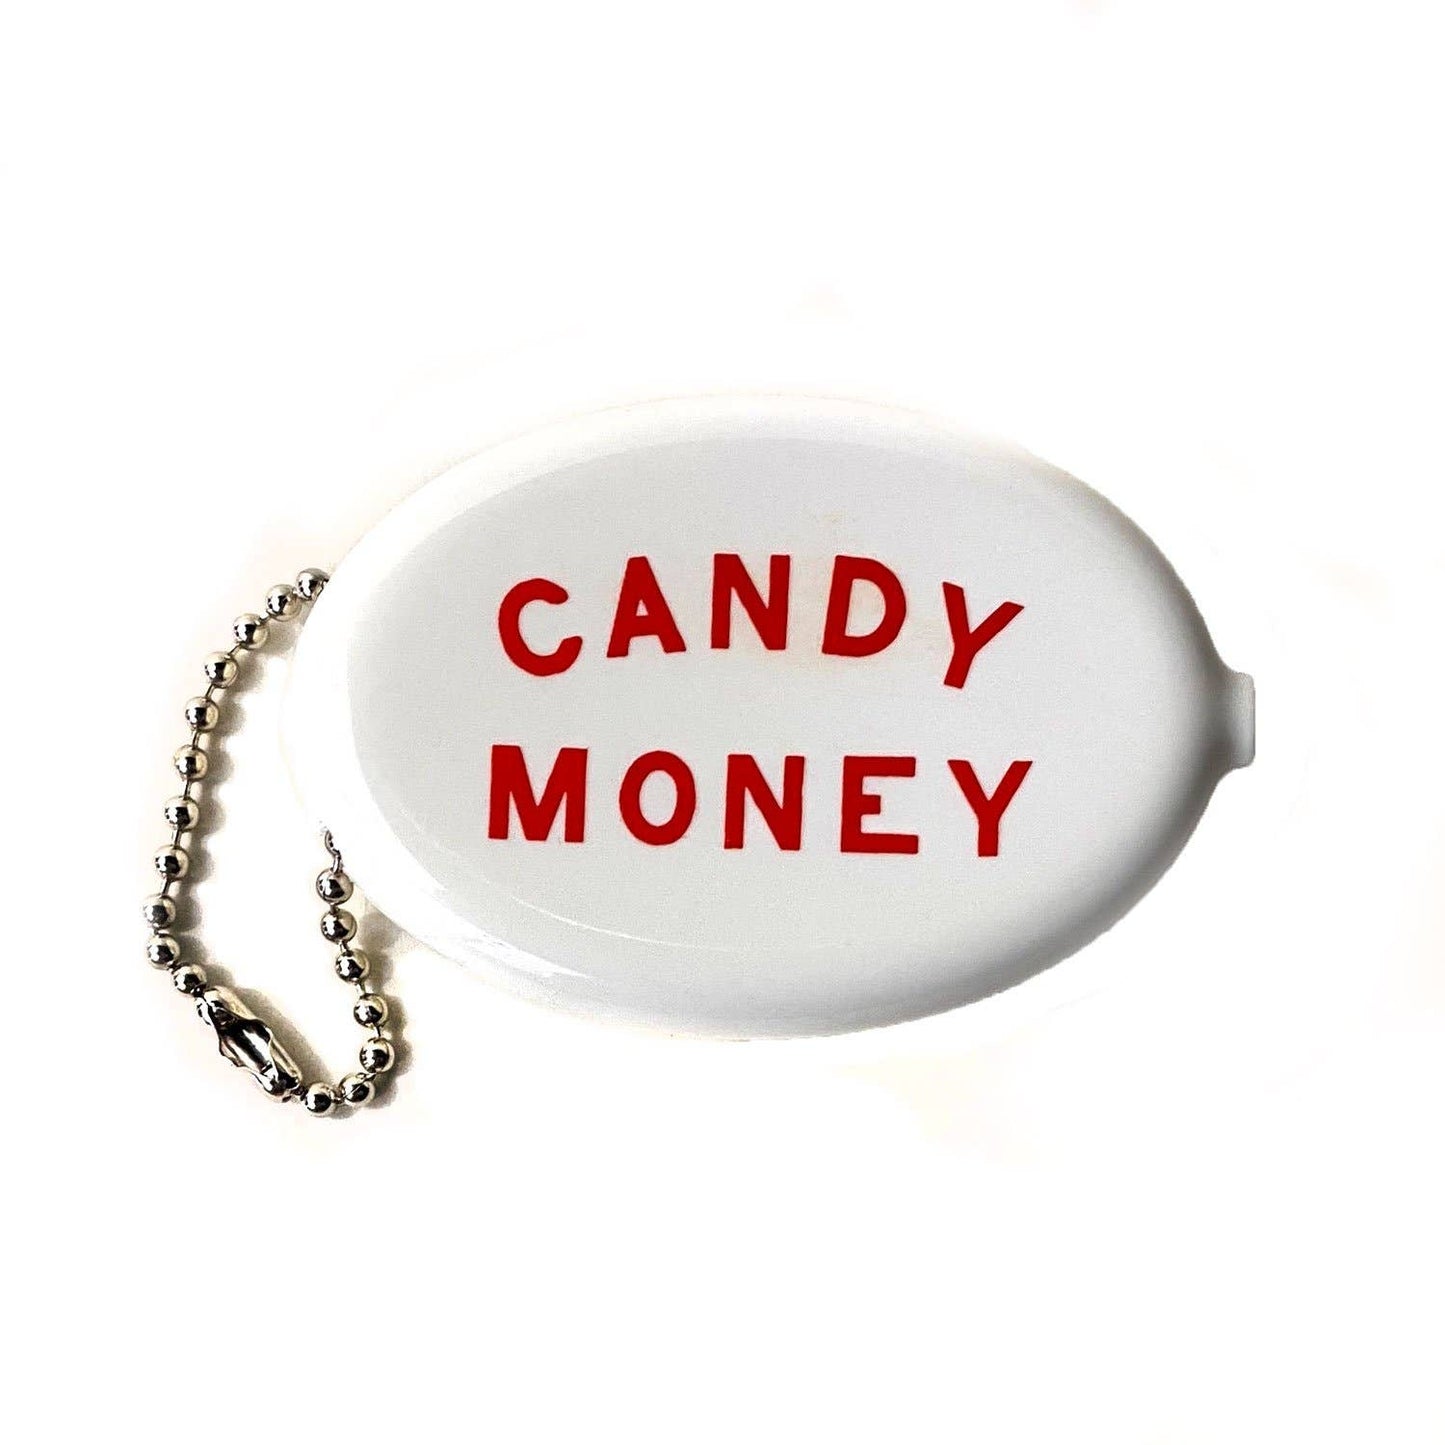 Candy Money Rubber Coin Pouch | '80s-'90s Retro Squeeze Coin Purse with Chain